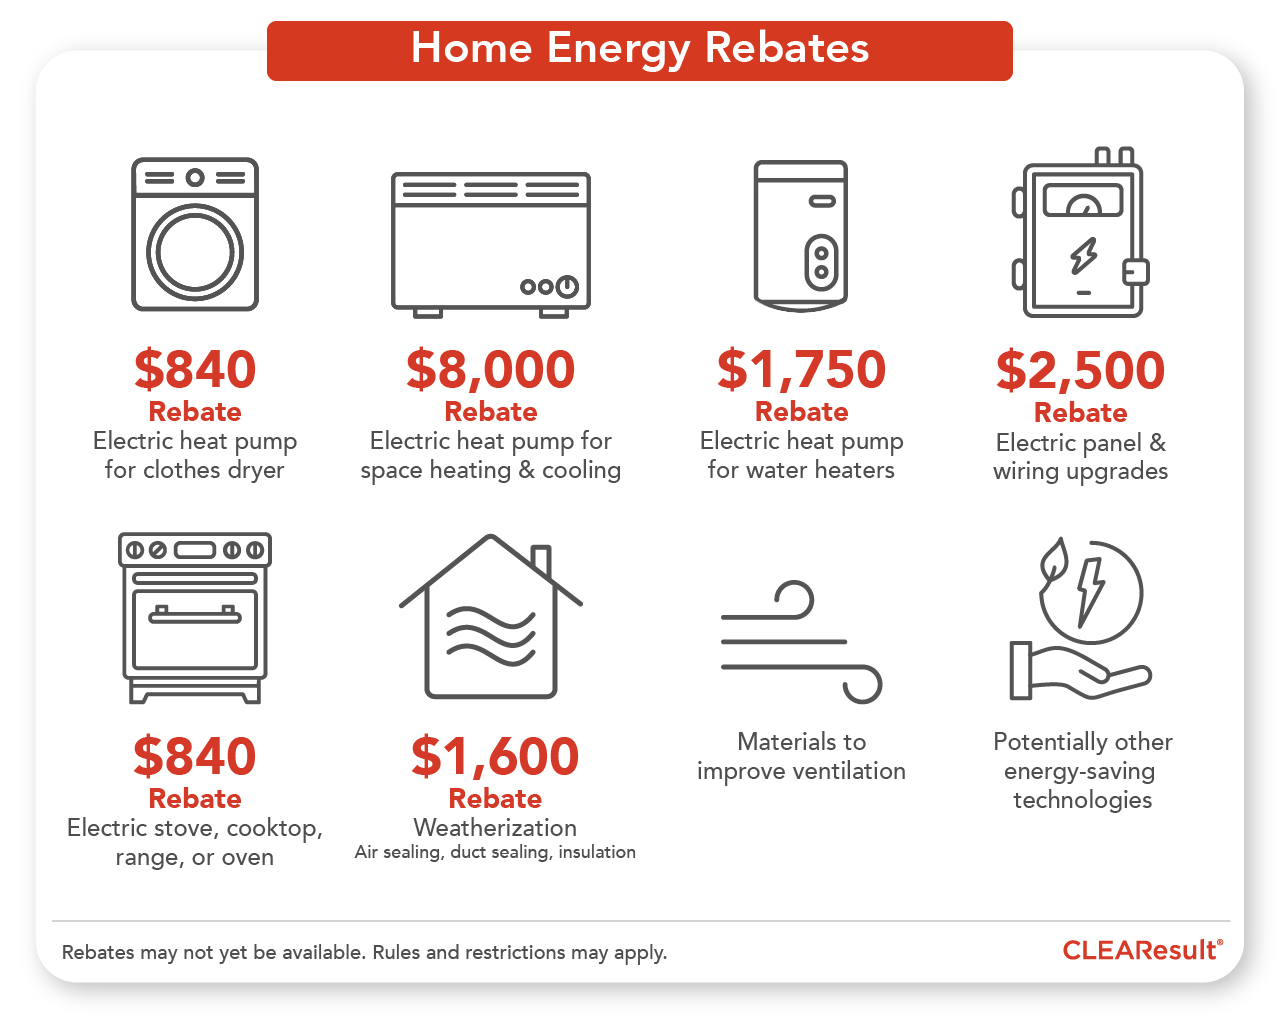 more-home-energy-rebates-are-on-the-way-here-s-what-the-inflation